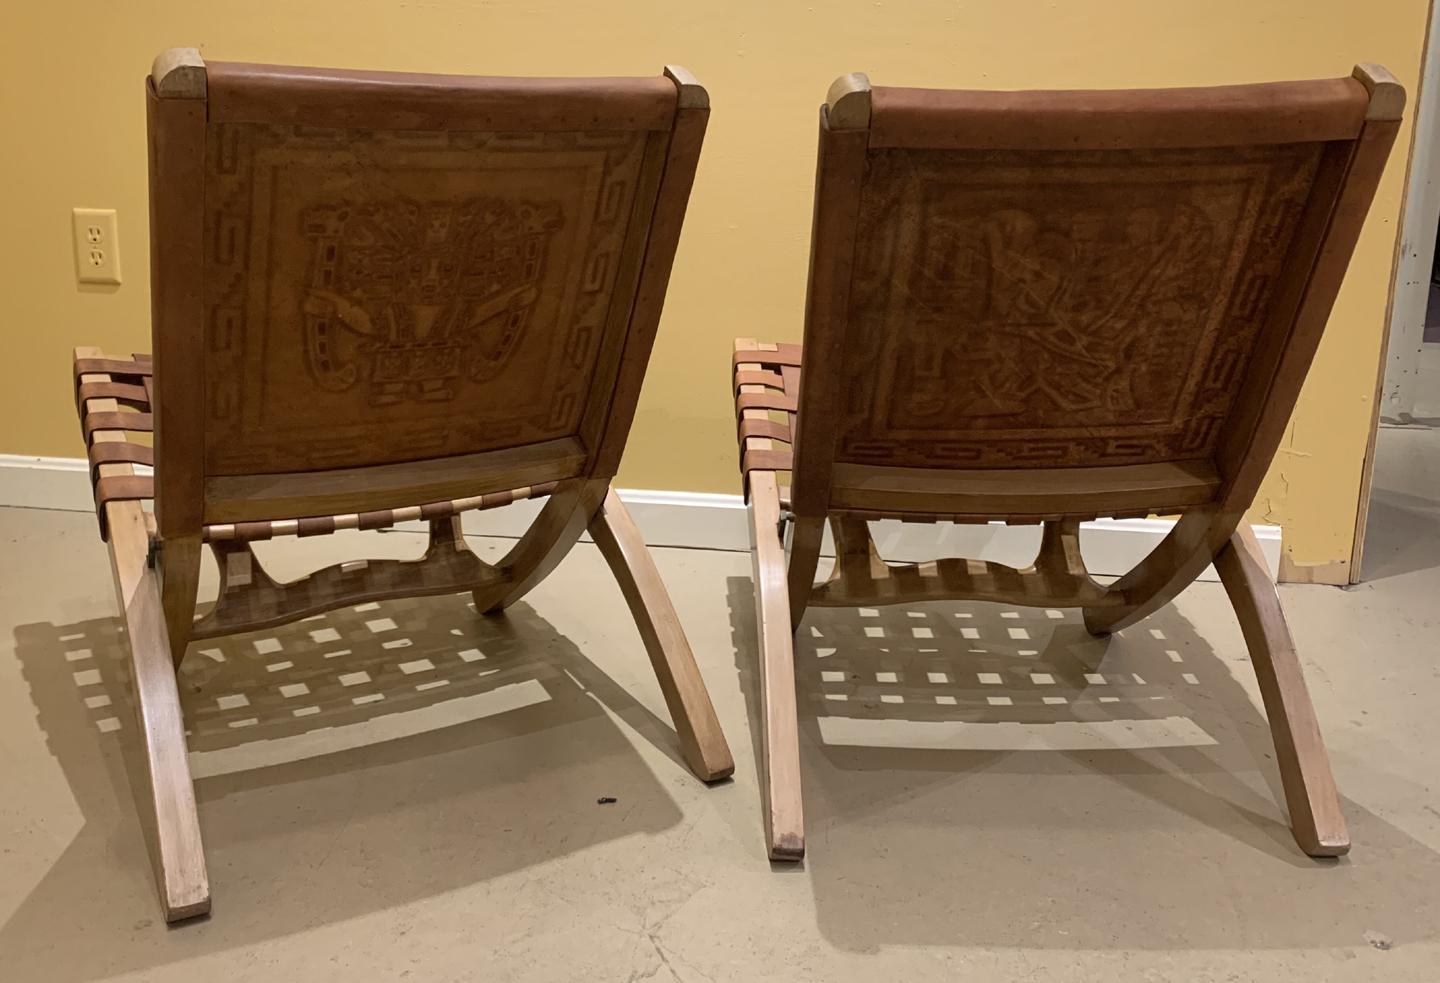 20th Century Pair of Wood and Leather Folding Side Chairs from Peru, circa 1970s